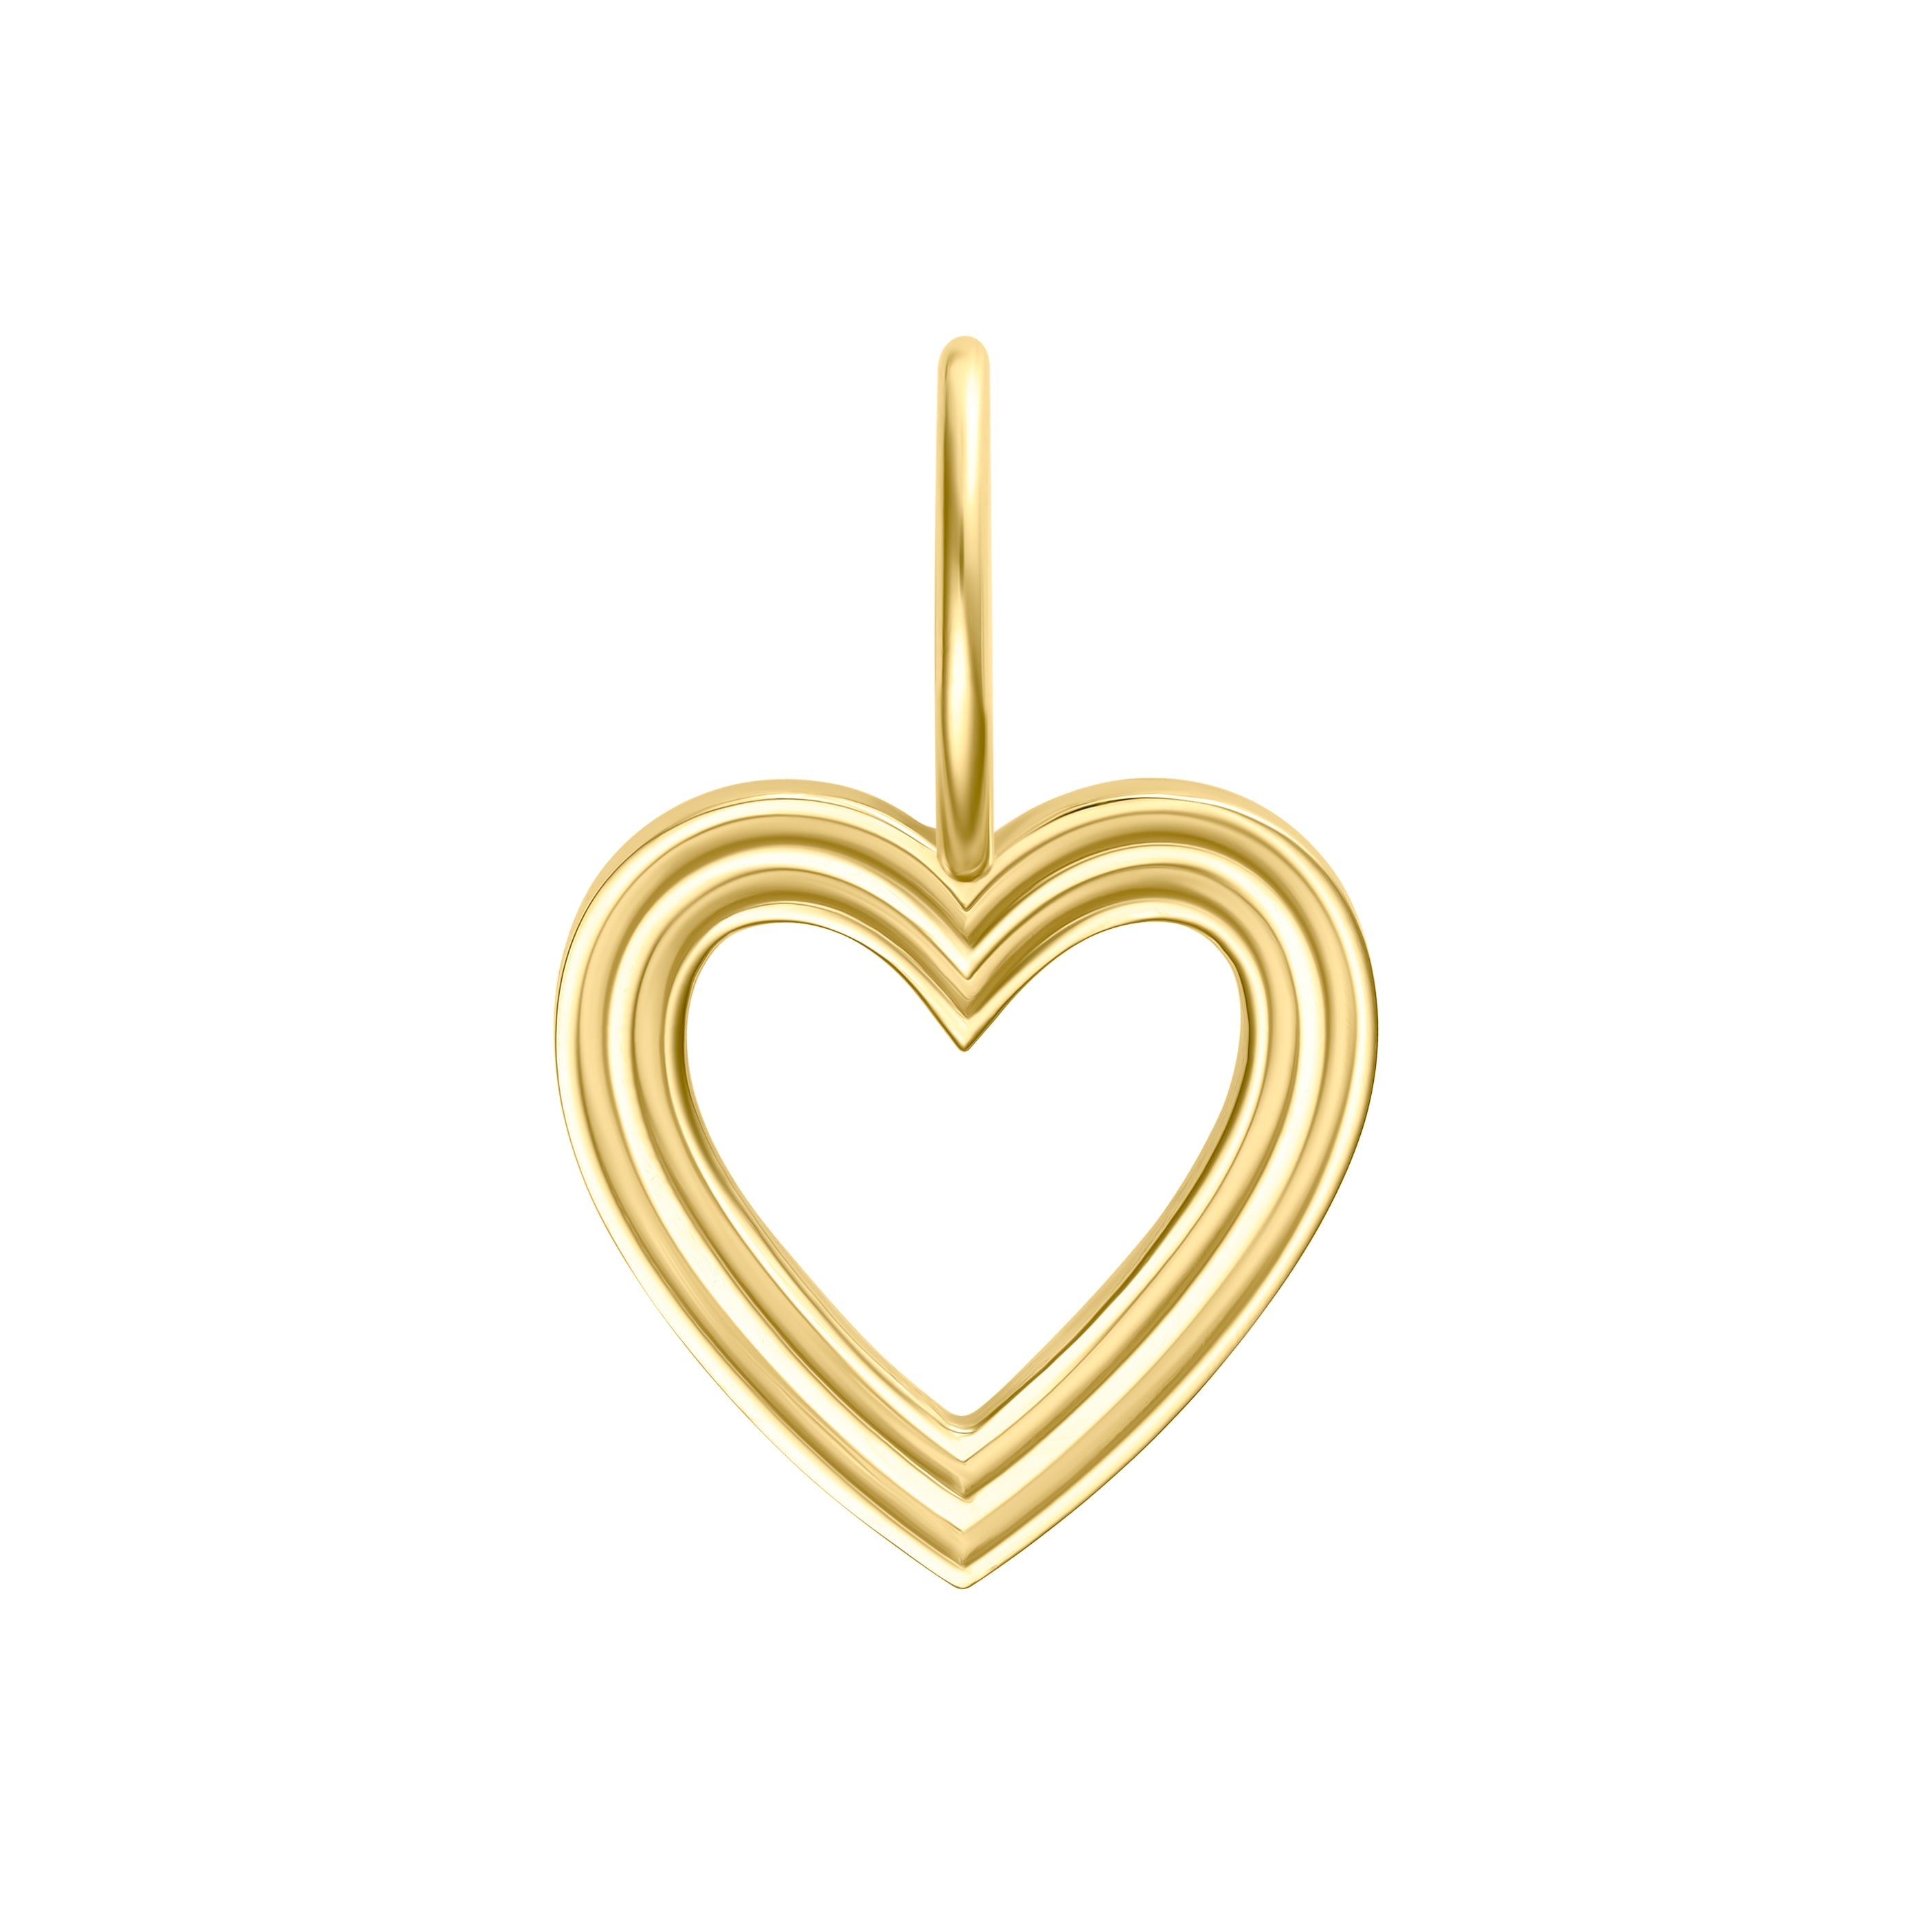 Retro Fluted Heart Charm - Limited Edition